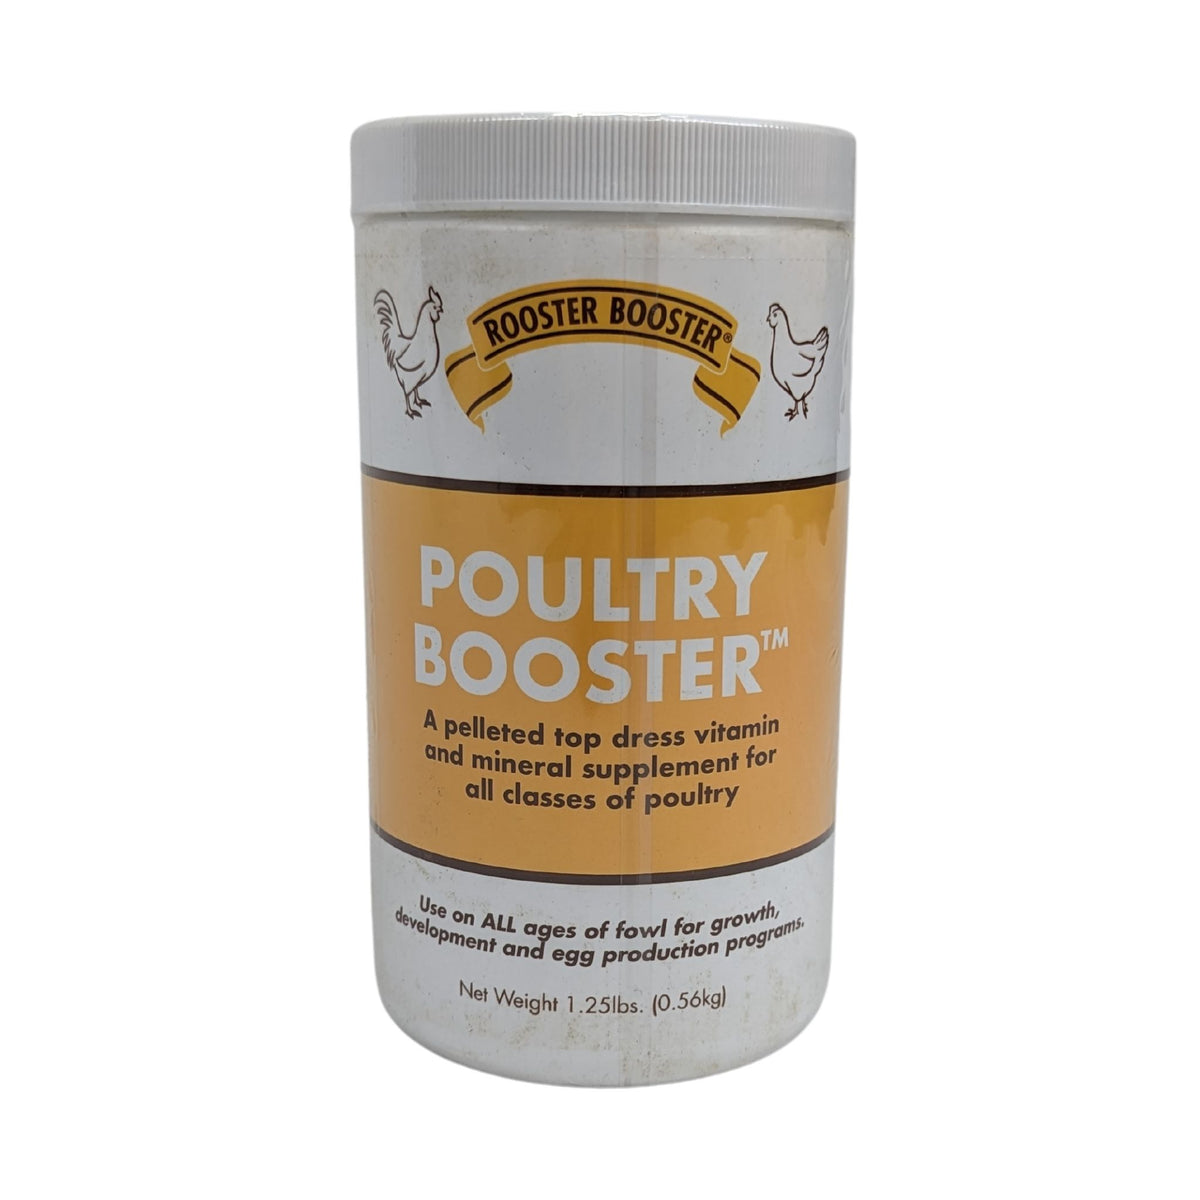 Poultry Booster Chicken Supplement